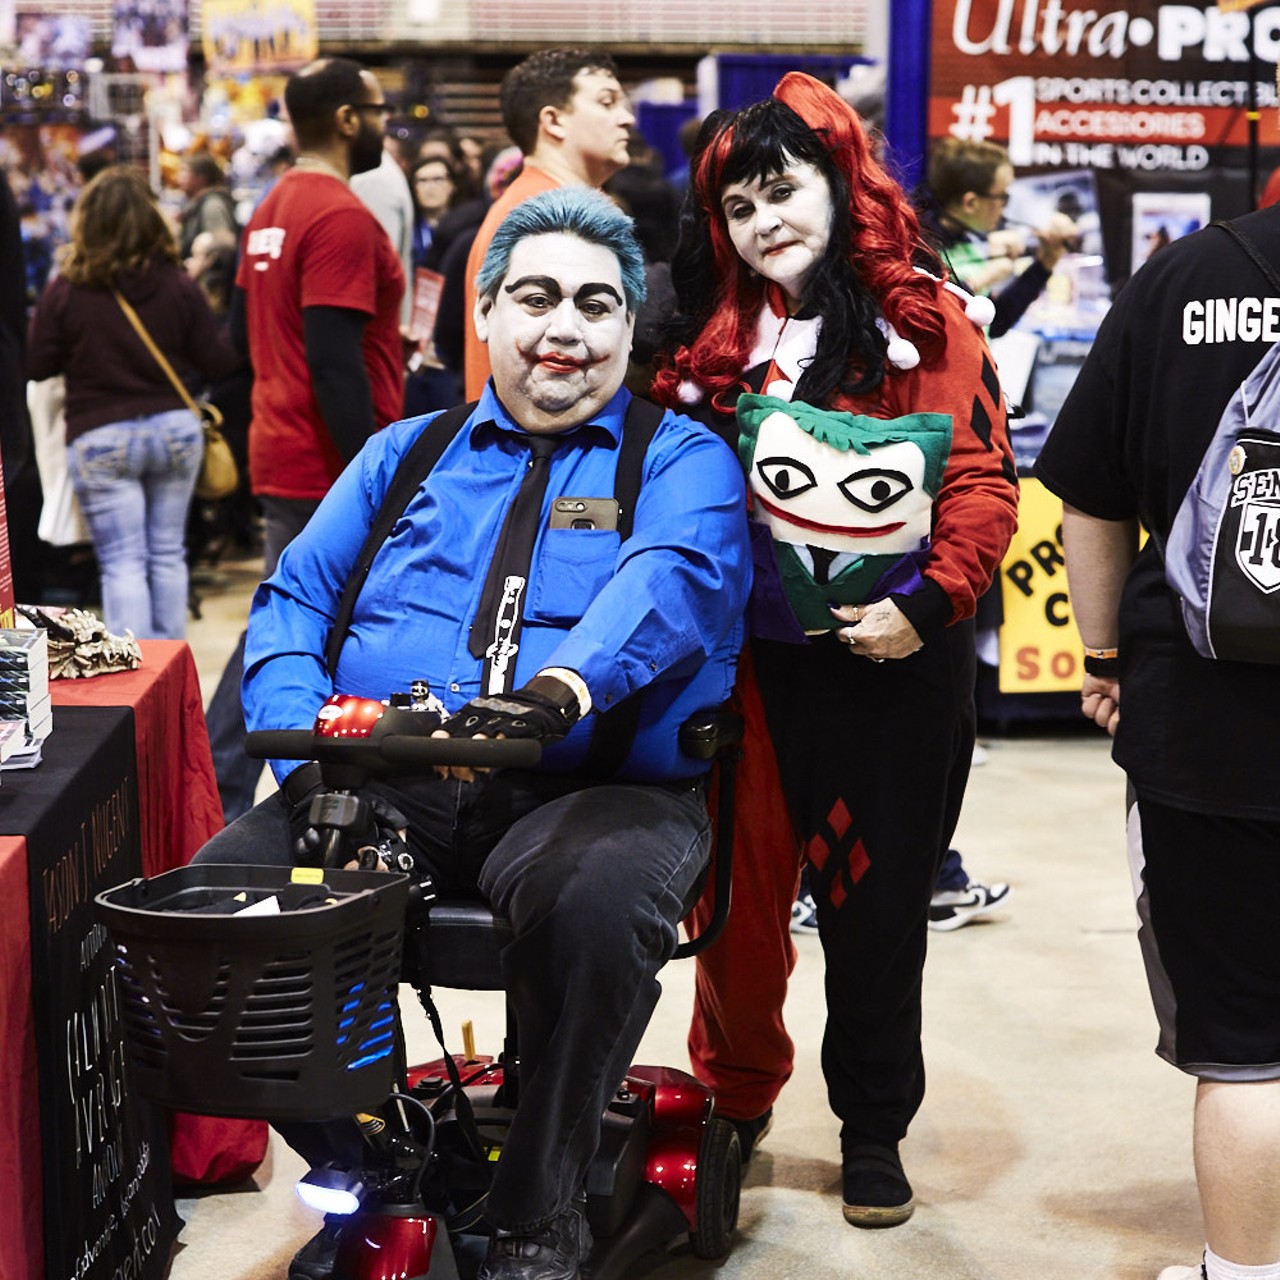 Wizard World 2018 at America's Center in downtown St. Louis.